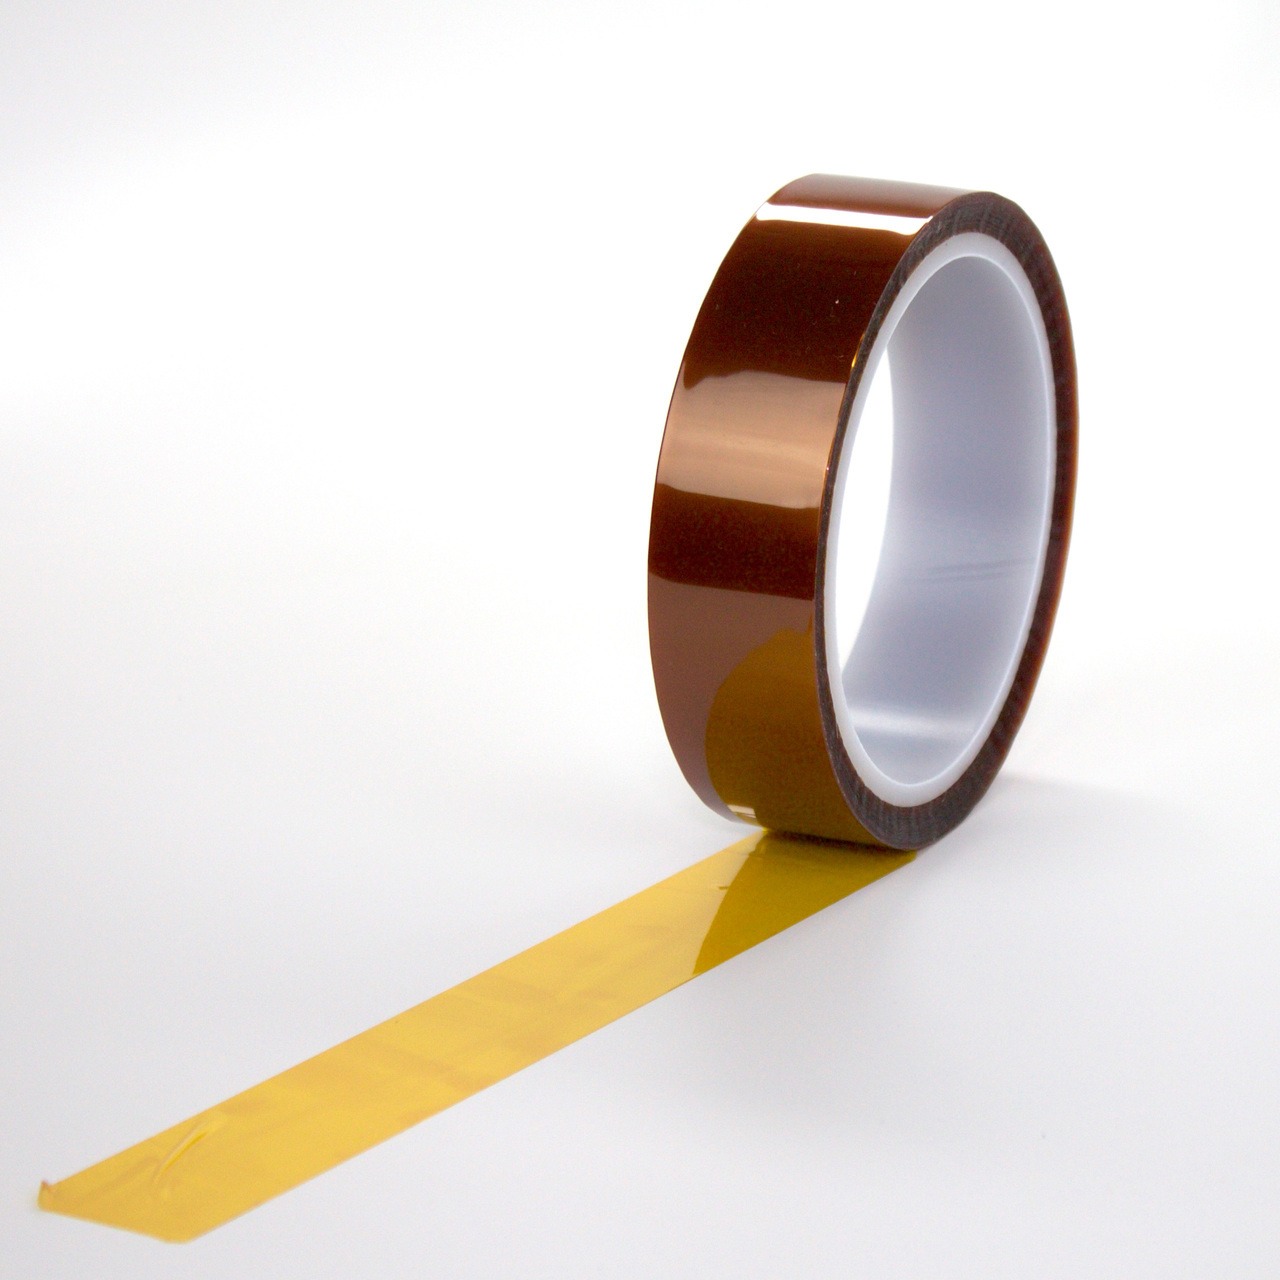 Gold Kapton Polyimide Tape 12 inch 36 yards